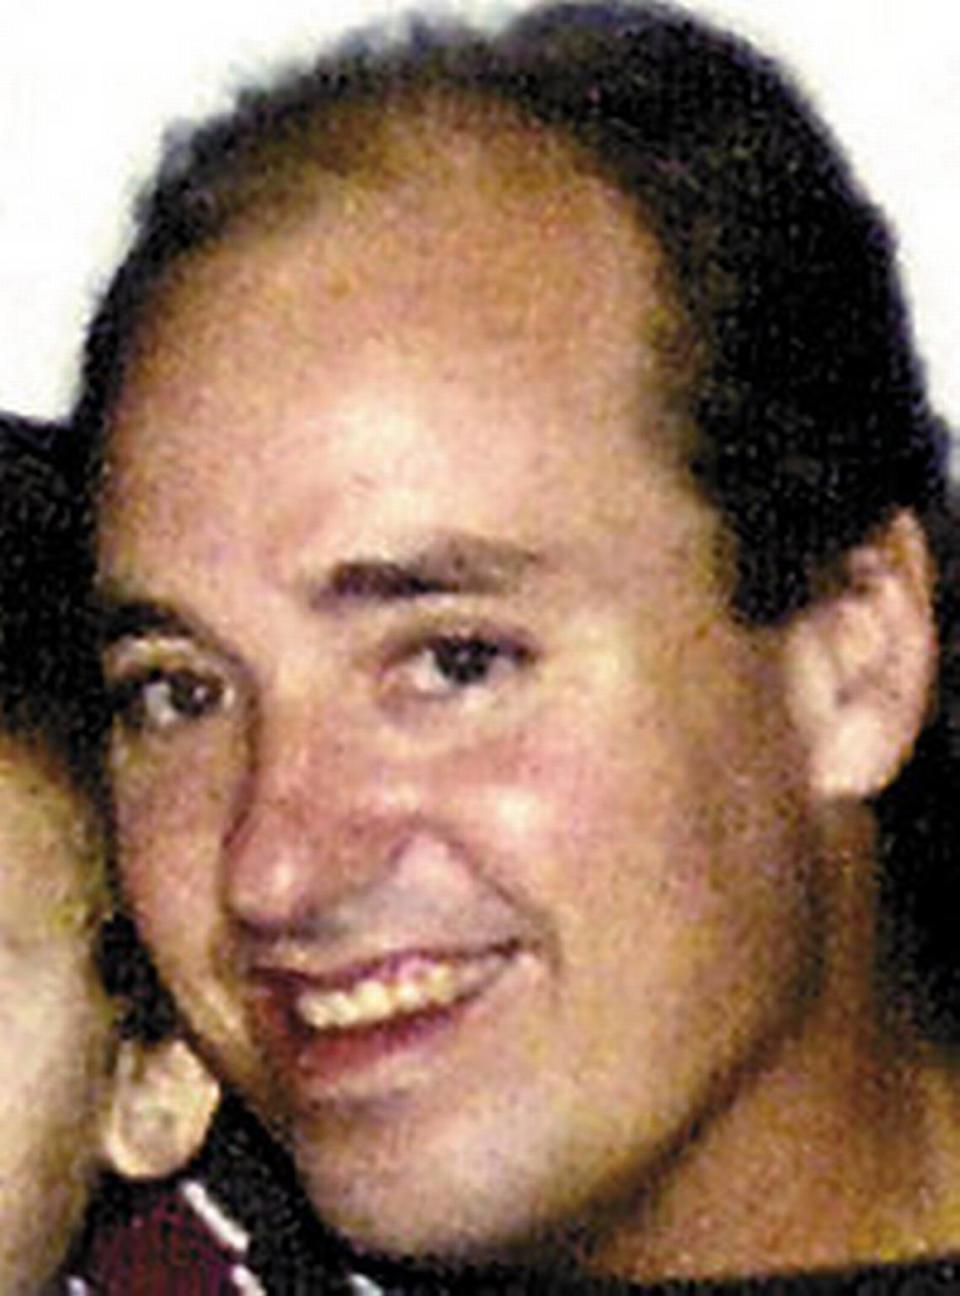 Stephen Wells of San Pedro and his nephew Jerry Rios, 11, were was shot to death on camping trip to Morro Bay on July 8, 2001. Stephen Arthur Deflaun has been charged with their murders.